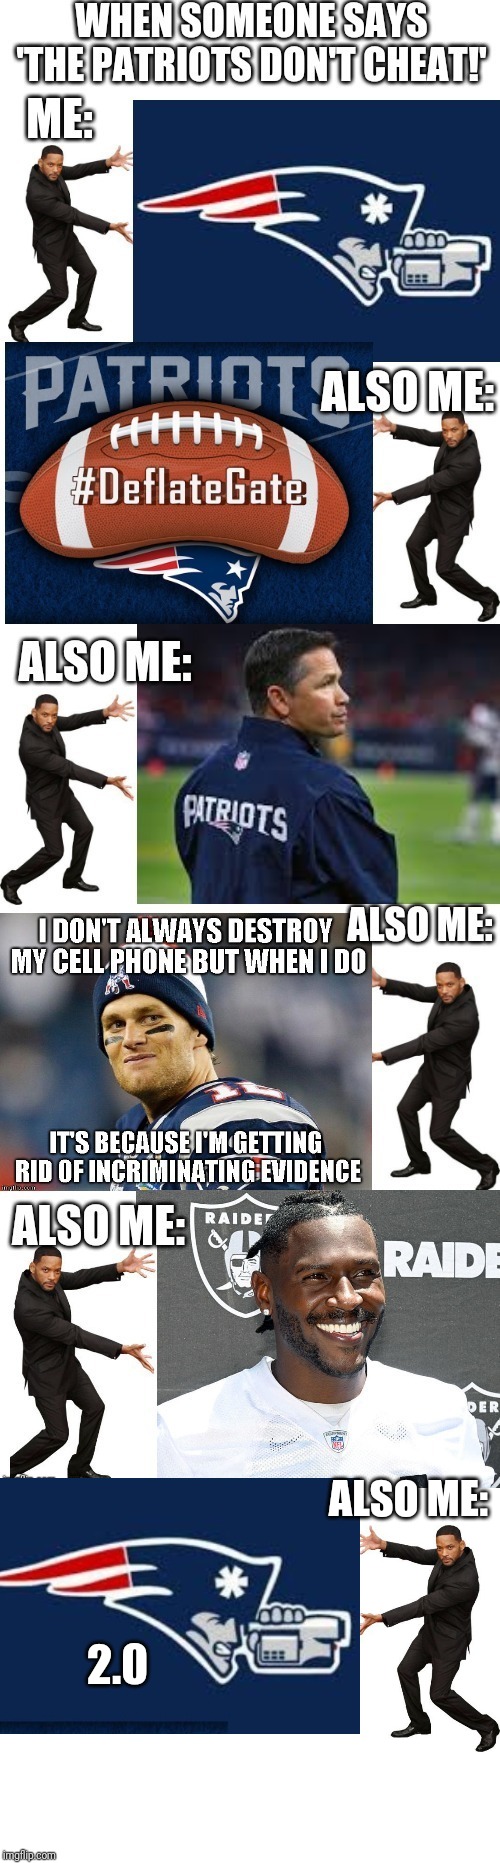 PatriotsAreCheaters2019 |  ALSO ME:; 2.0 | image tagged in tada will smith,new england patriots,cheaters | made w/ Imgflip meme maker